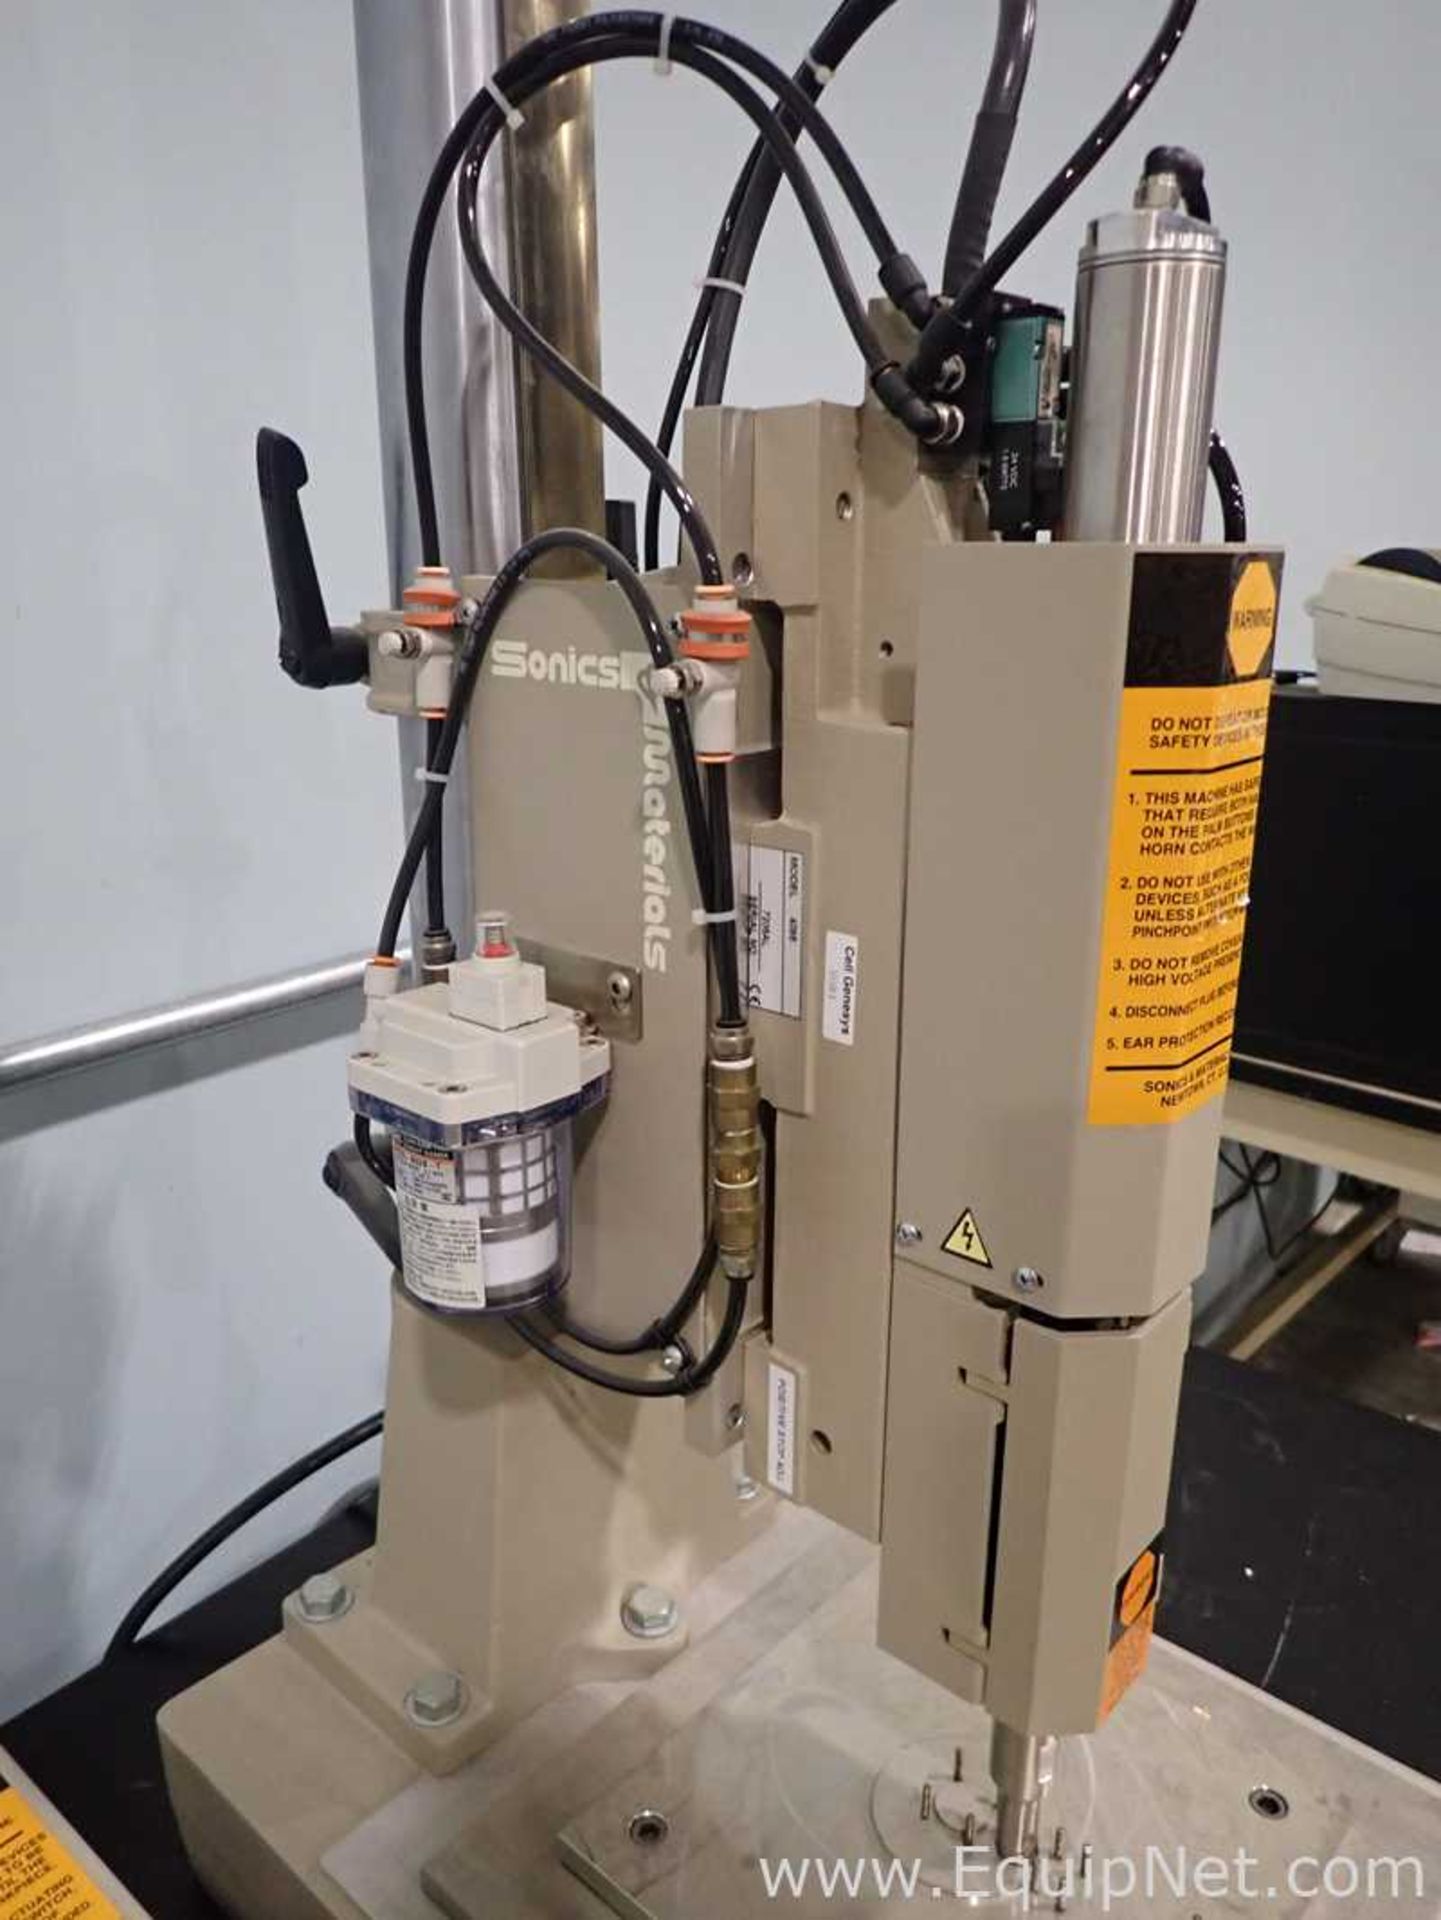 Sonics and Materials 4095 Pneumatic Press with Microsonic Processor for Ultrasonic Plastic Assembly - Image 5 of 10